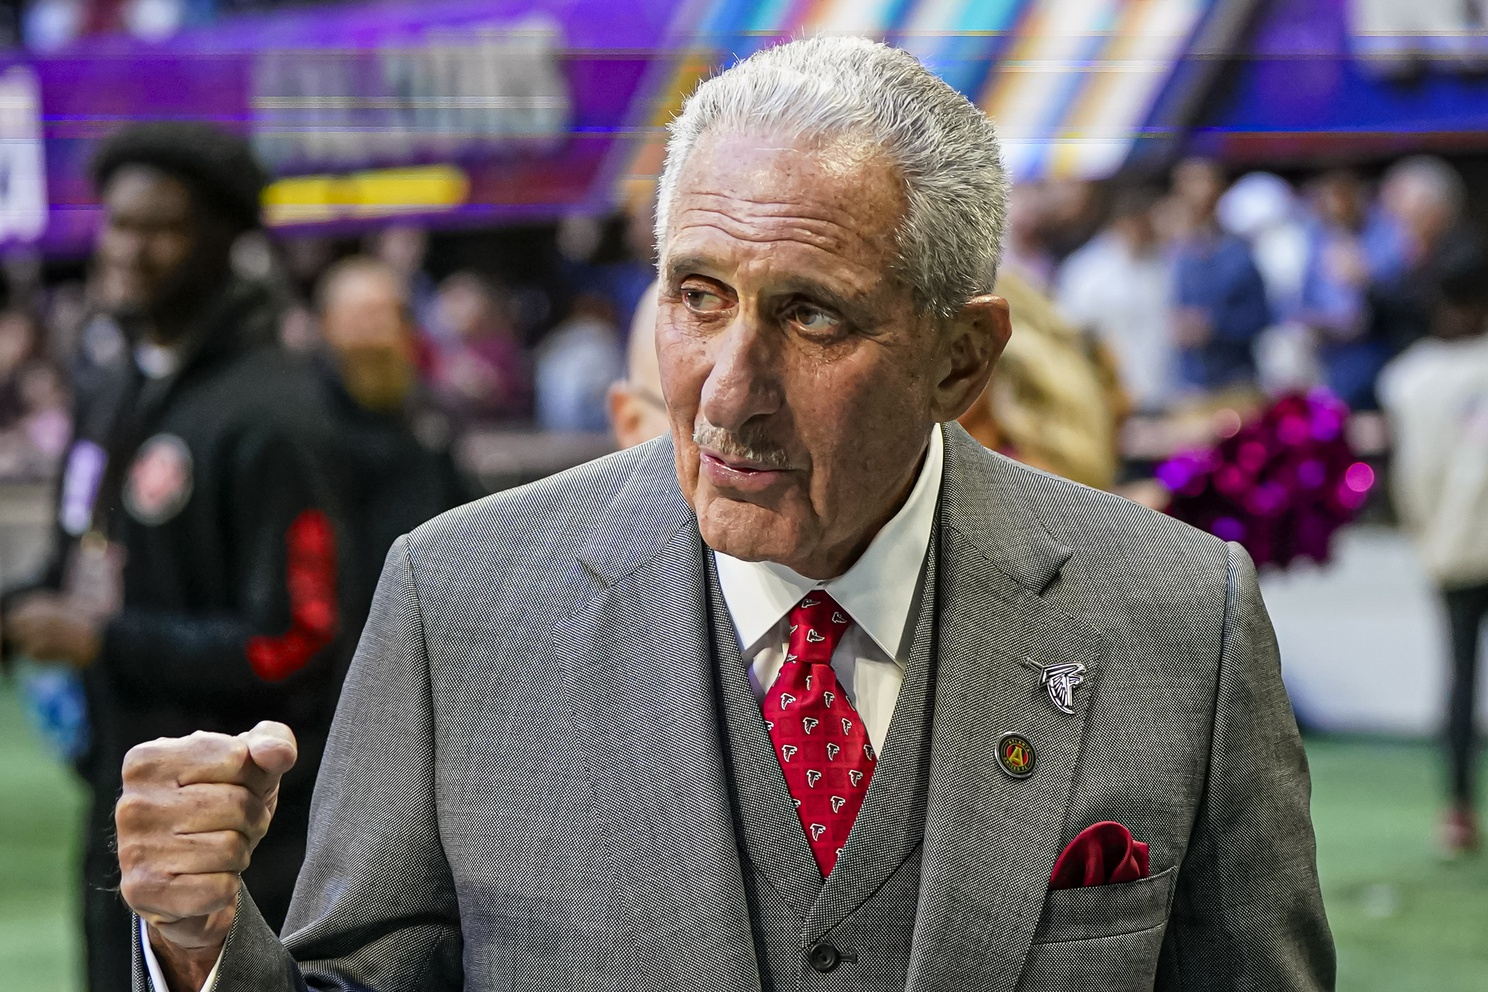 Arthur Blank's Falcons at the Heart of NFL's Latest Tampering Saga